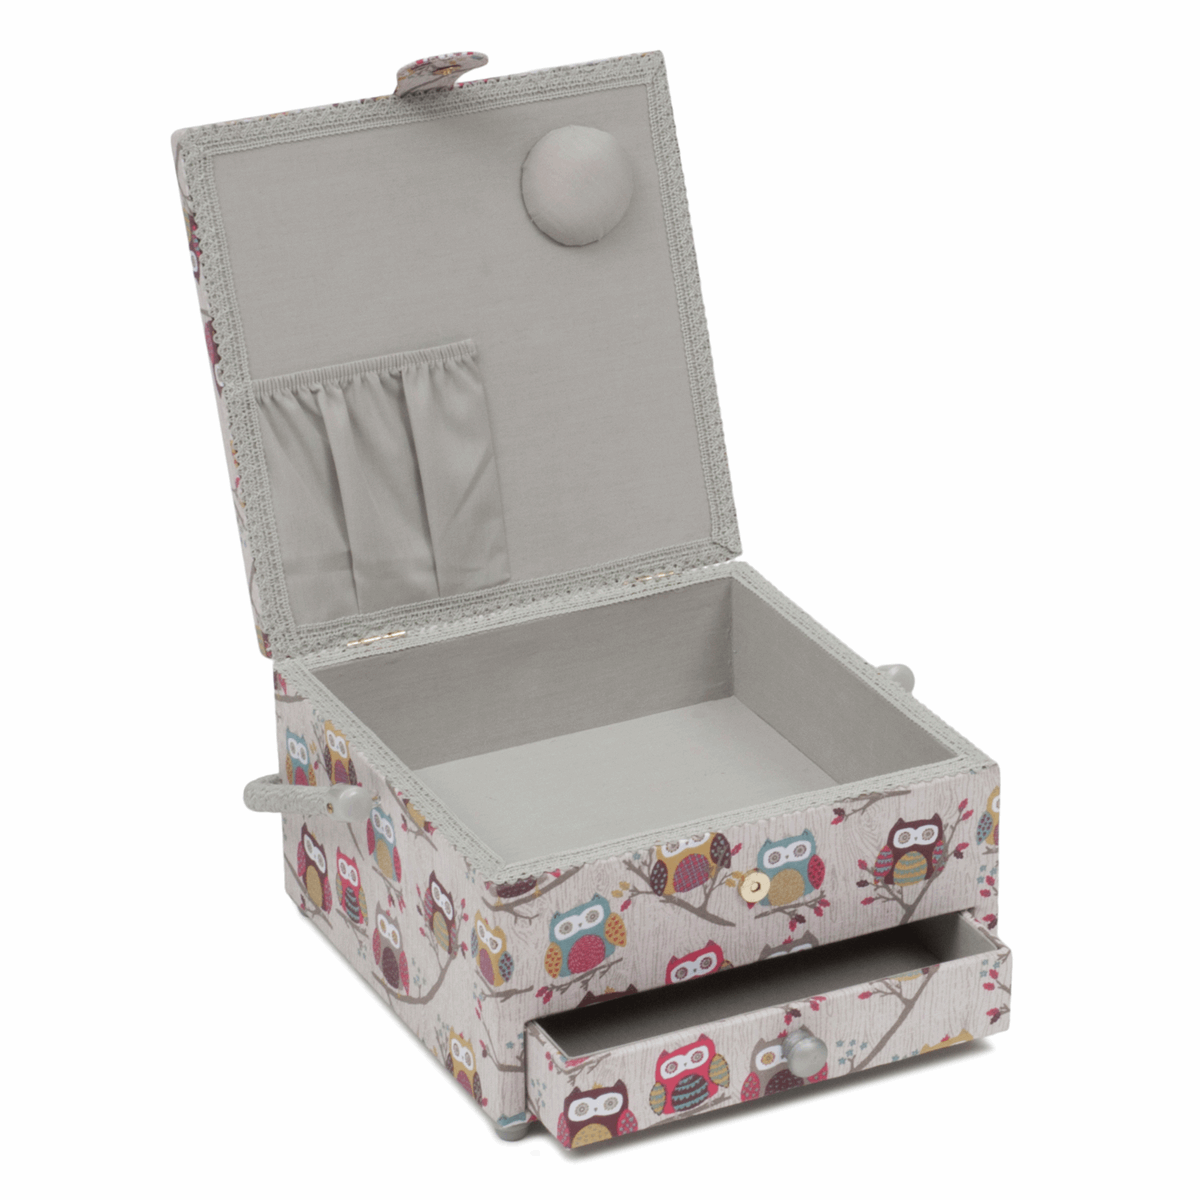 Hoot Sewing Box with Drawer - Large Square